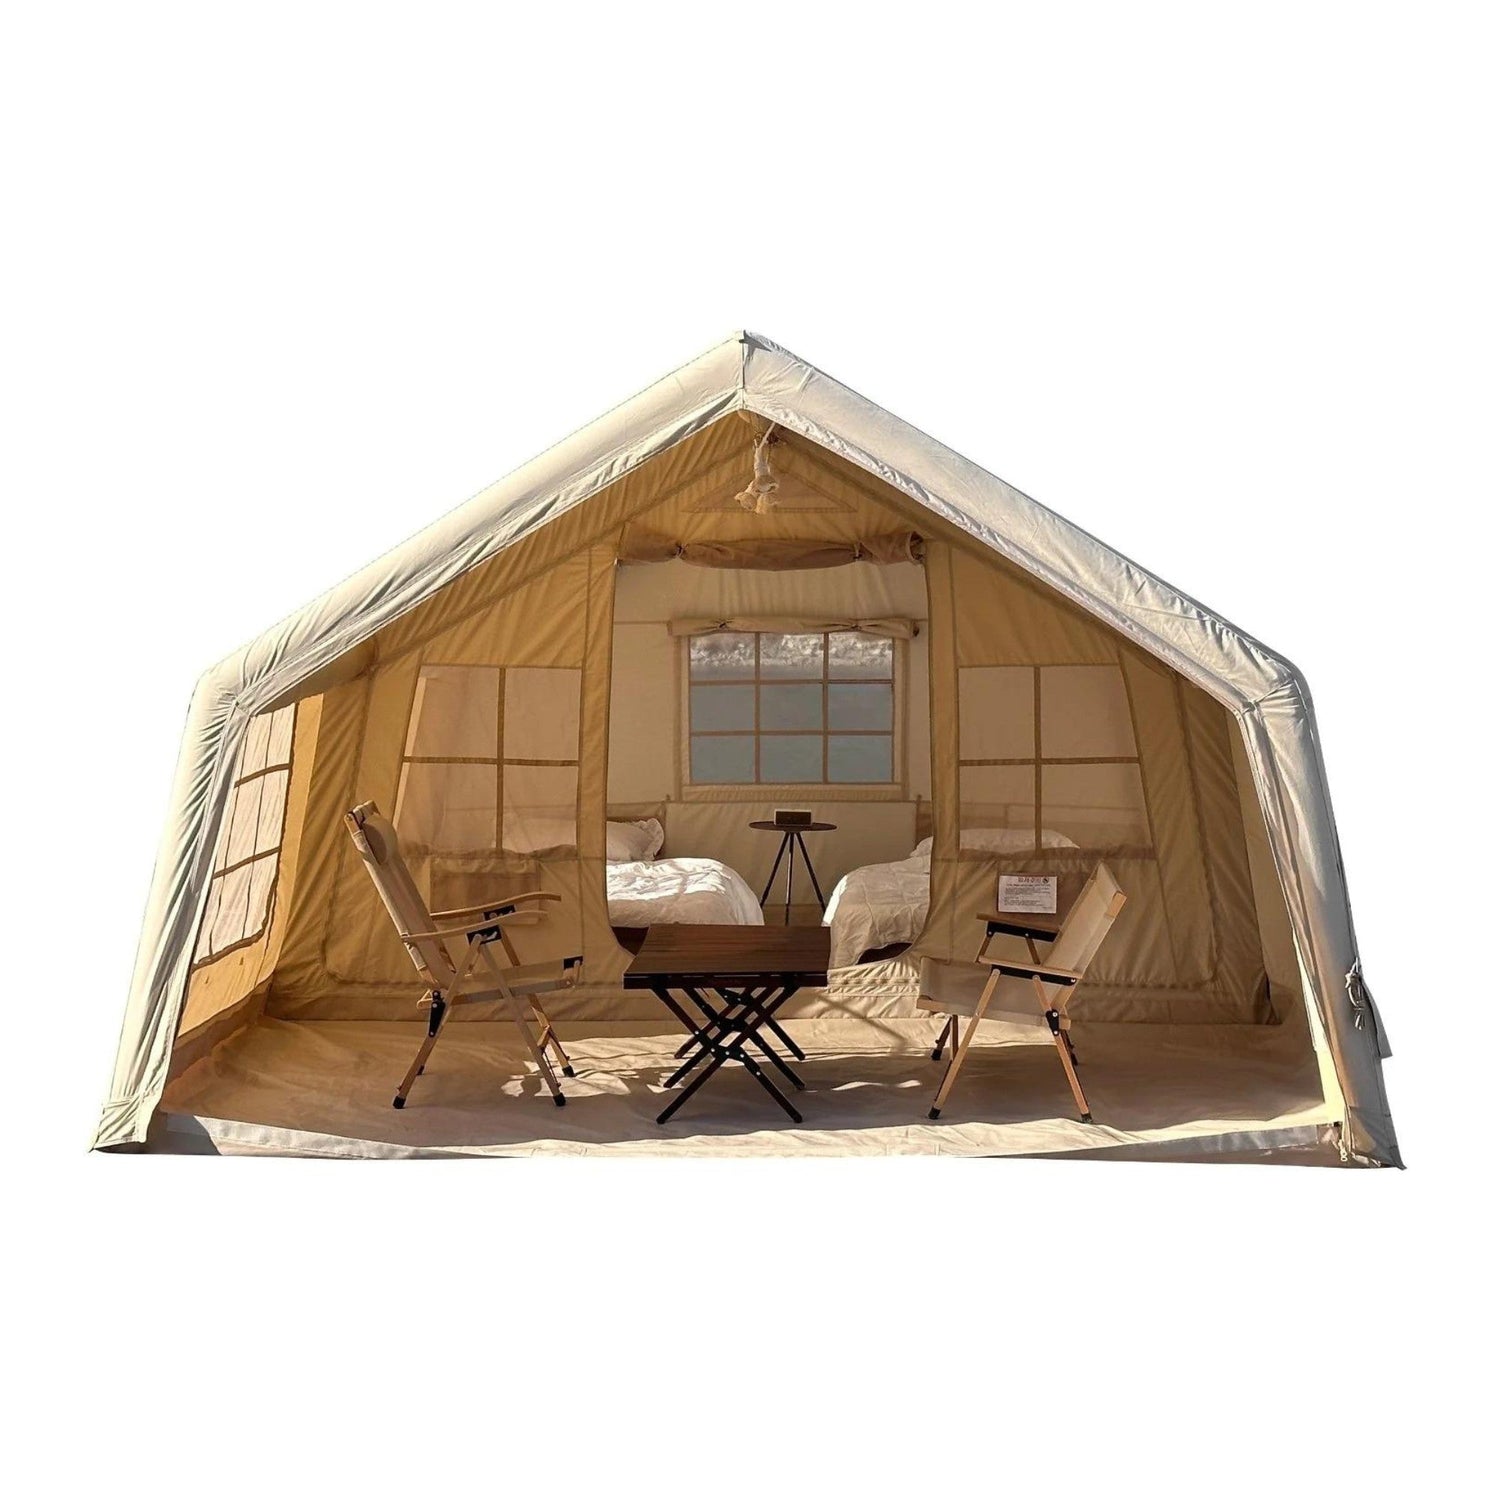 Premium 4-Season Outfitter Tents – Optimal All-Weather Hunting Comfort - Big Horn Golfer